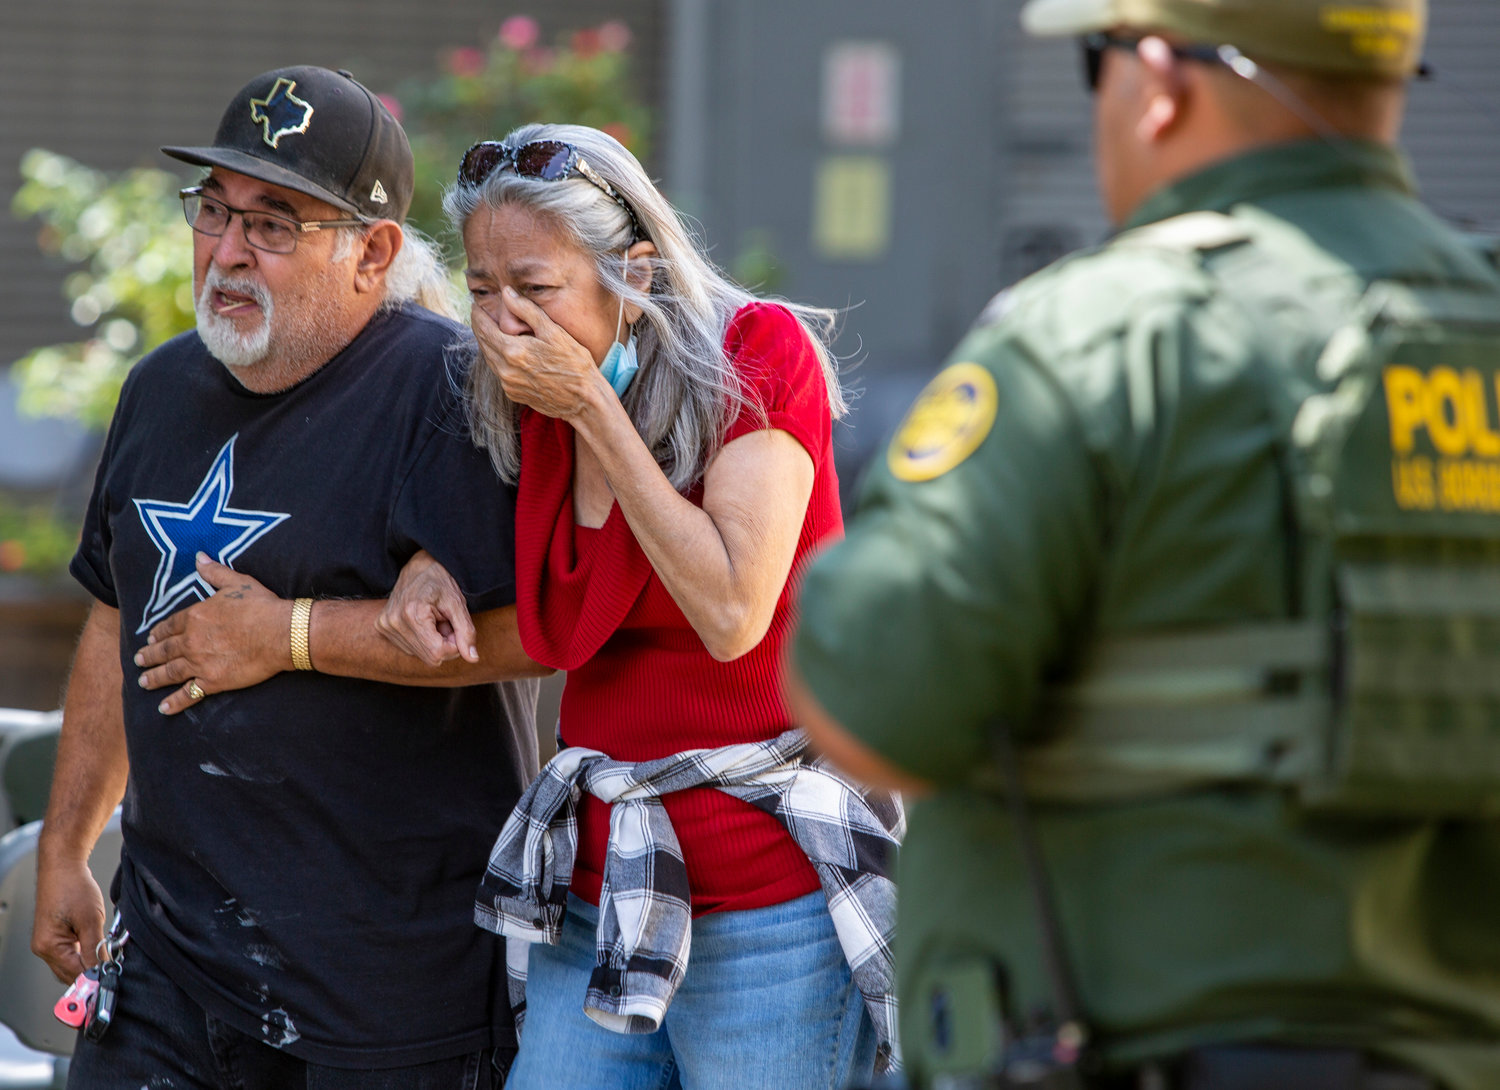 A woman cries Tuesday, May 24, 2022, as she leaves the Uvalde Civic Center, in Uvalde, Texas. At least 14 students and one teacher were killed when a gunman opened fire at Robb Elementary School in Uvalde, according to Texas Gov. Gregg Abbott. (William Luther/San Antonio Express-News/Zuma Press/TNS)